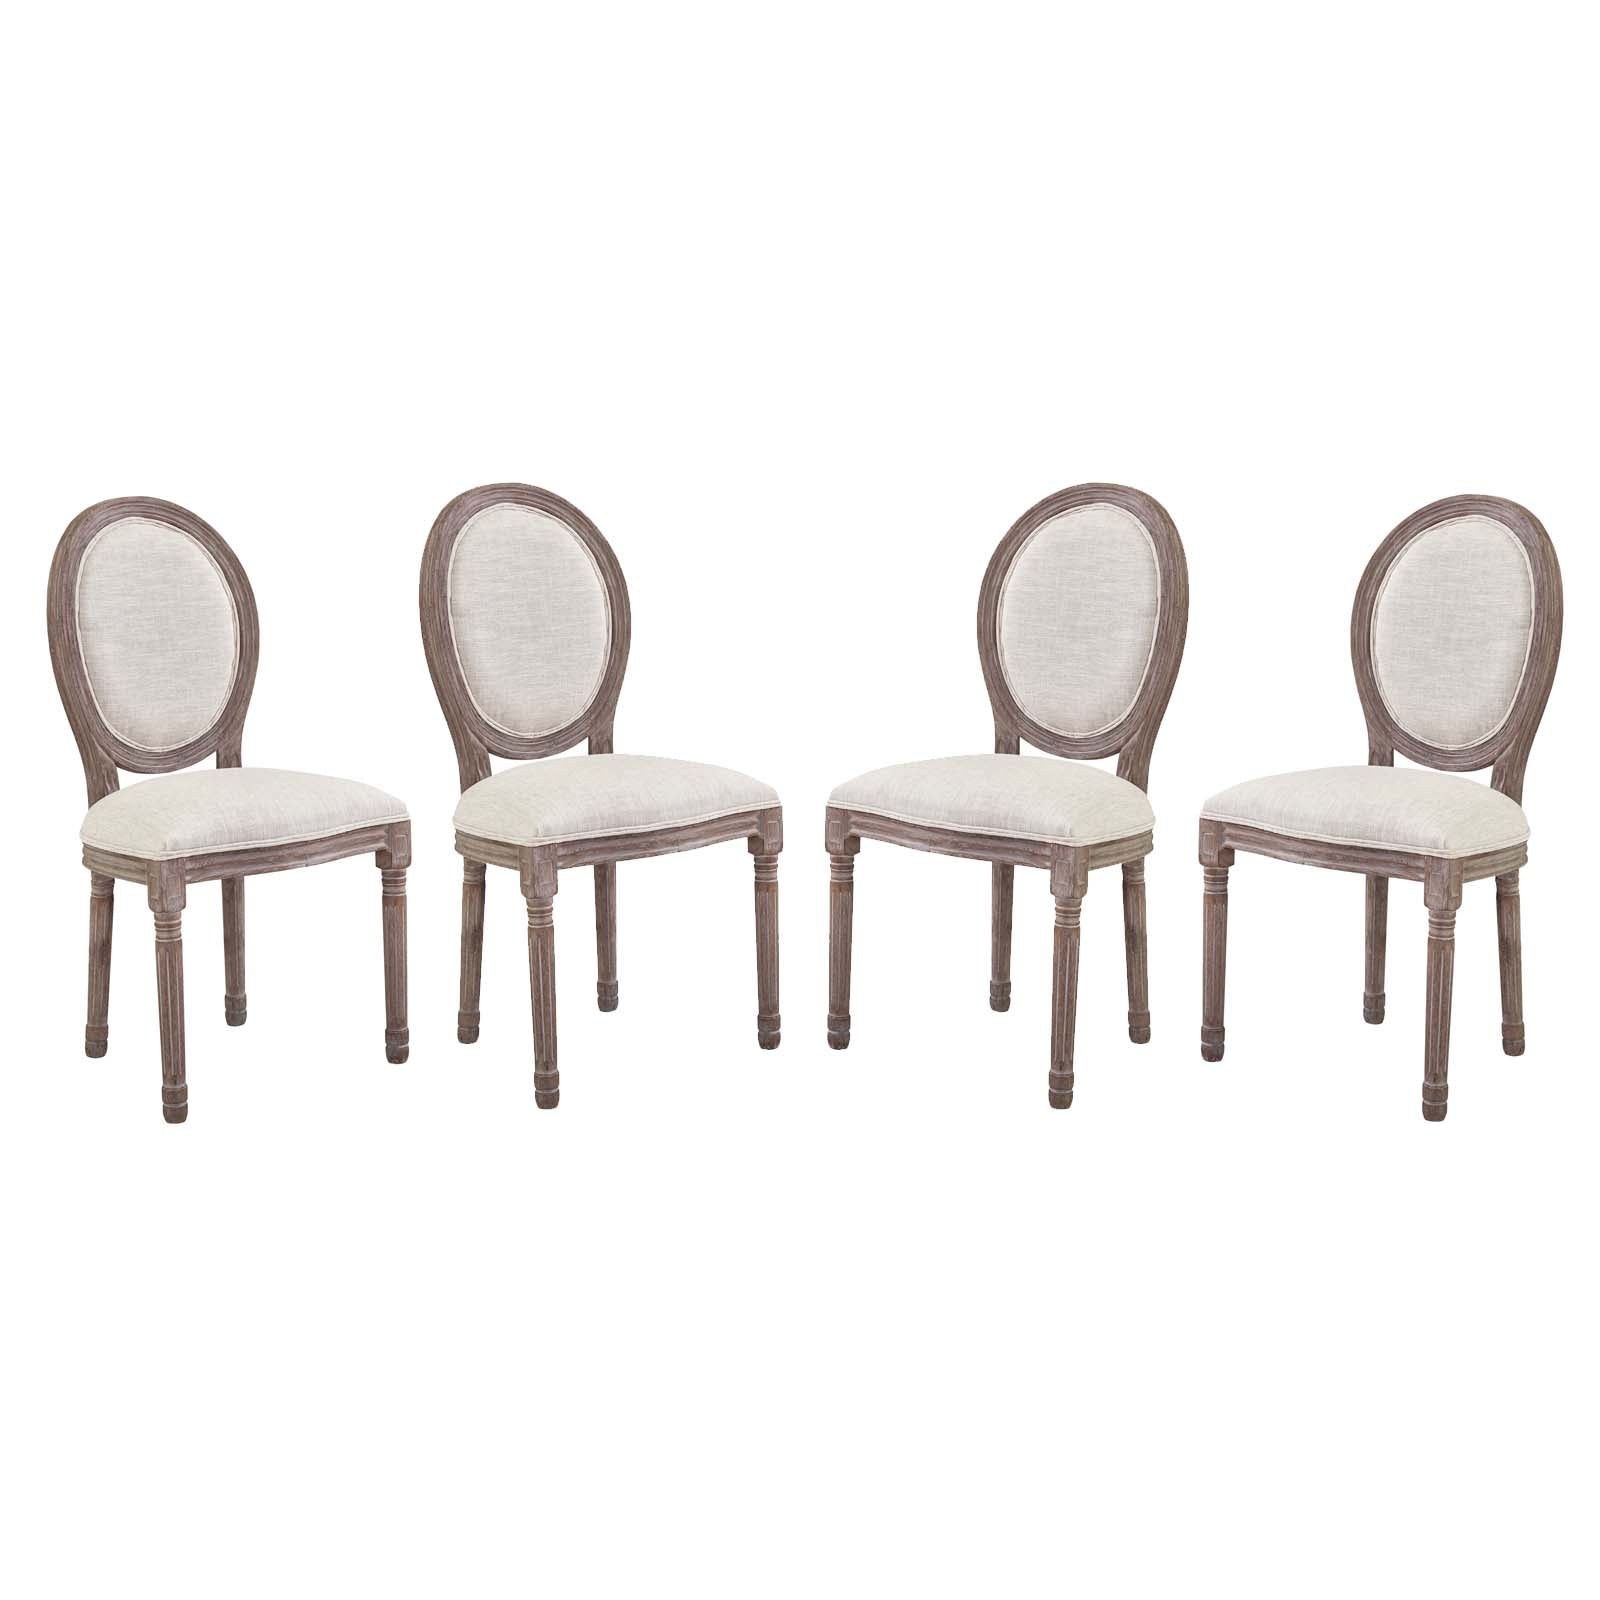 Emanate Dining Side Chair Upholstered Fabric Set of 4 - East Shore Modern Home Furnishings